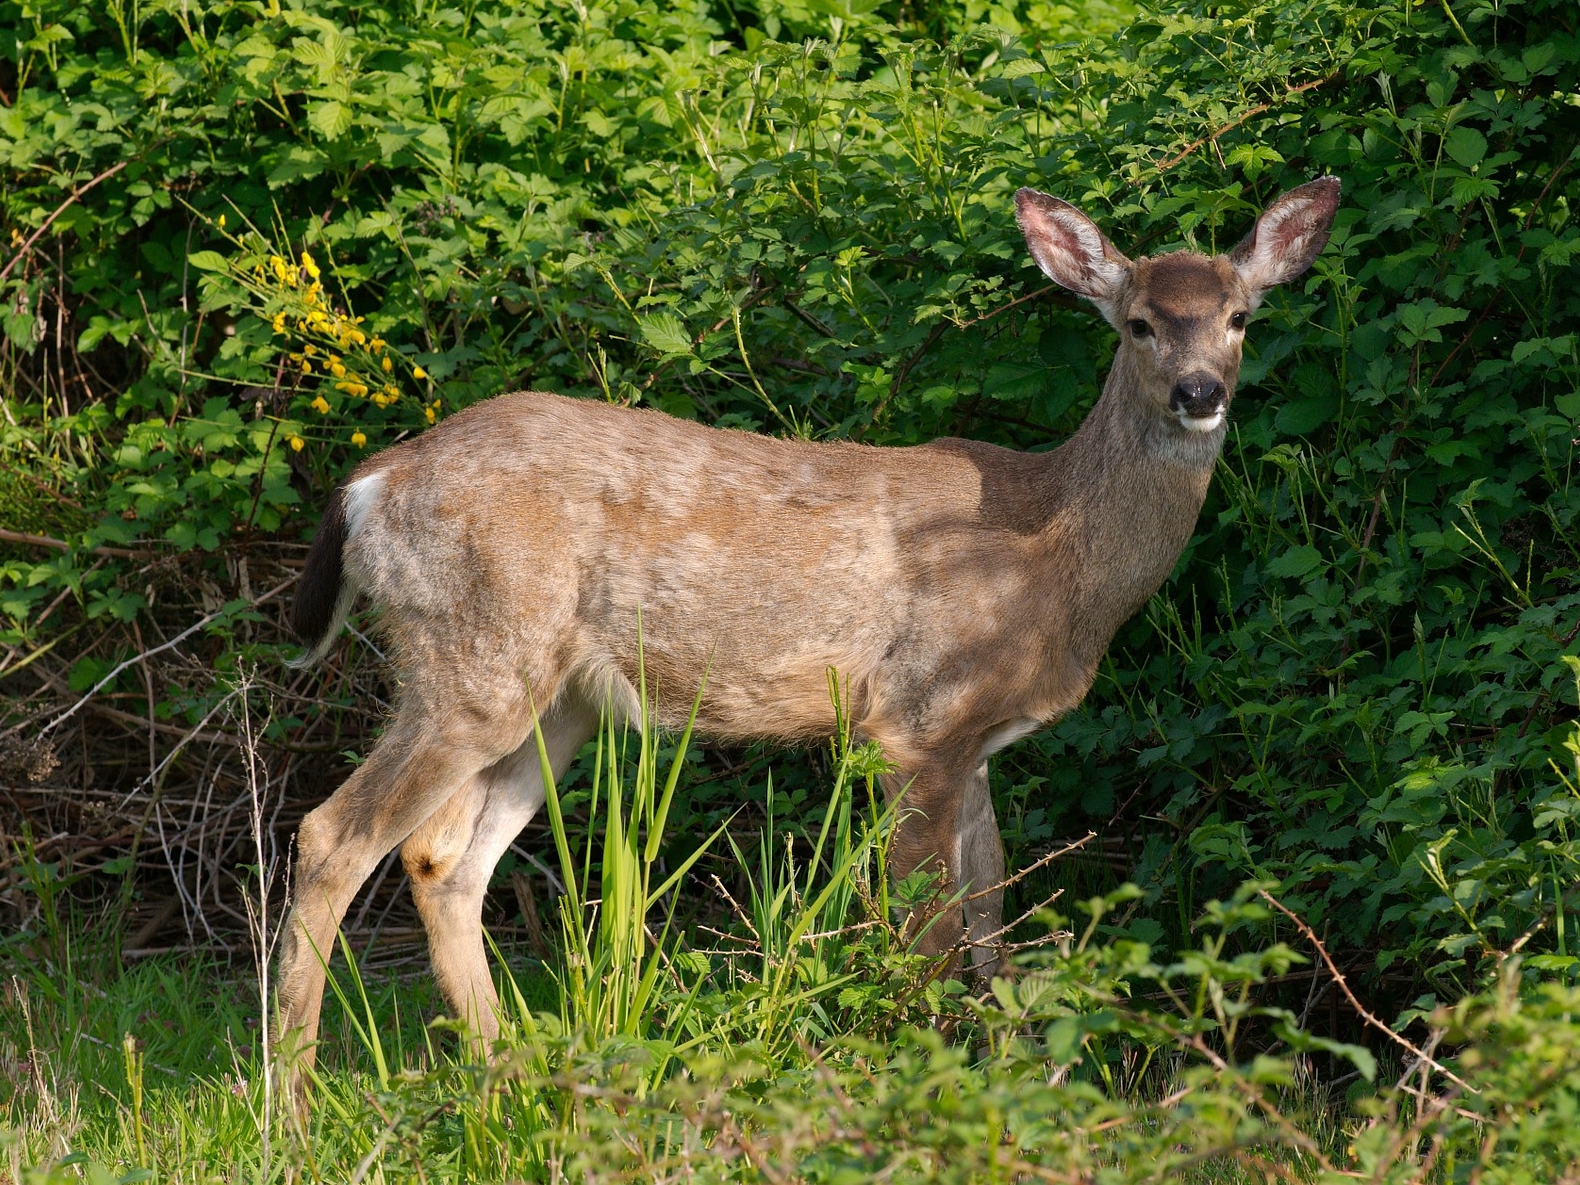 Deer Resistant Plants And Flowers Keep Deer Out Of Your Garden The Old Farmer S Almanac,Red Tail Boa Baby